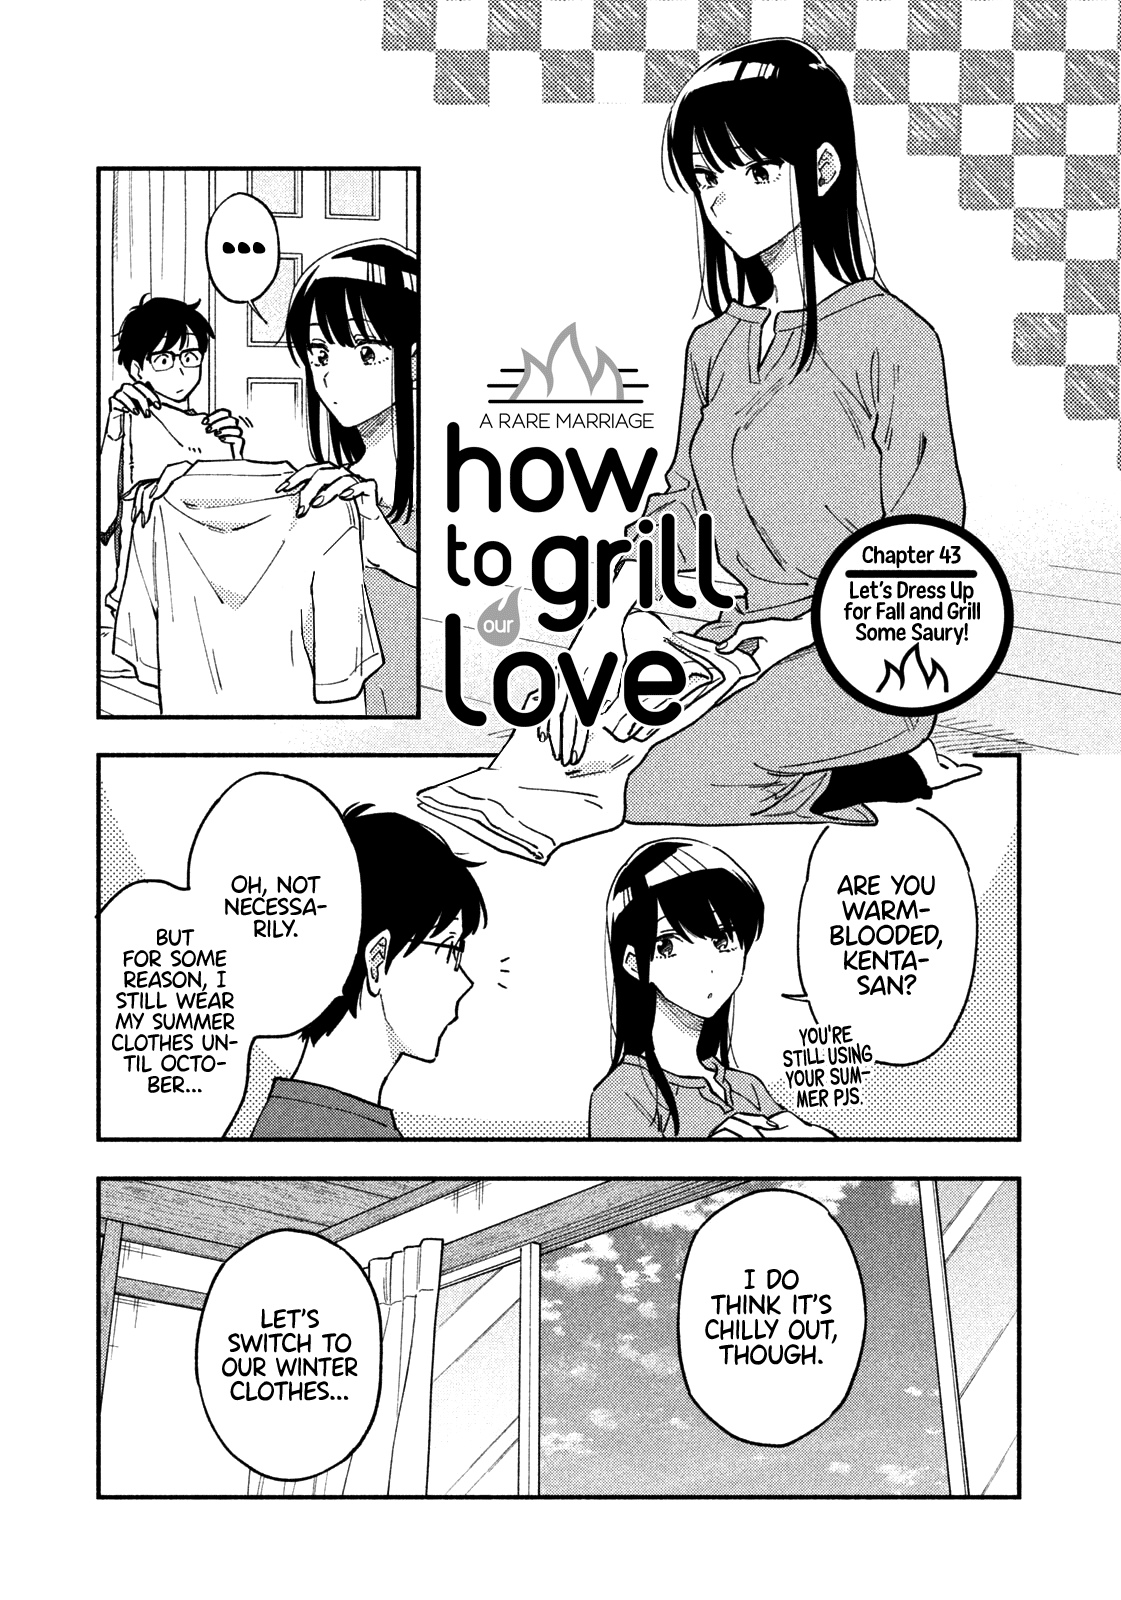 A Rare Marriage: How To Grill Our Love Chapter 43: Let’S Dress Up For Fall And Grill Some Saury! - Picture 2